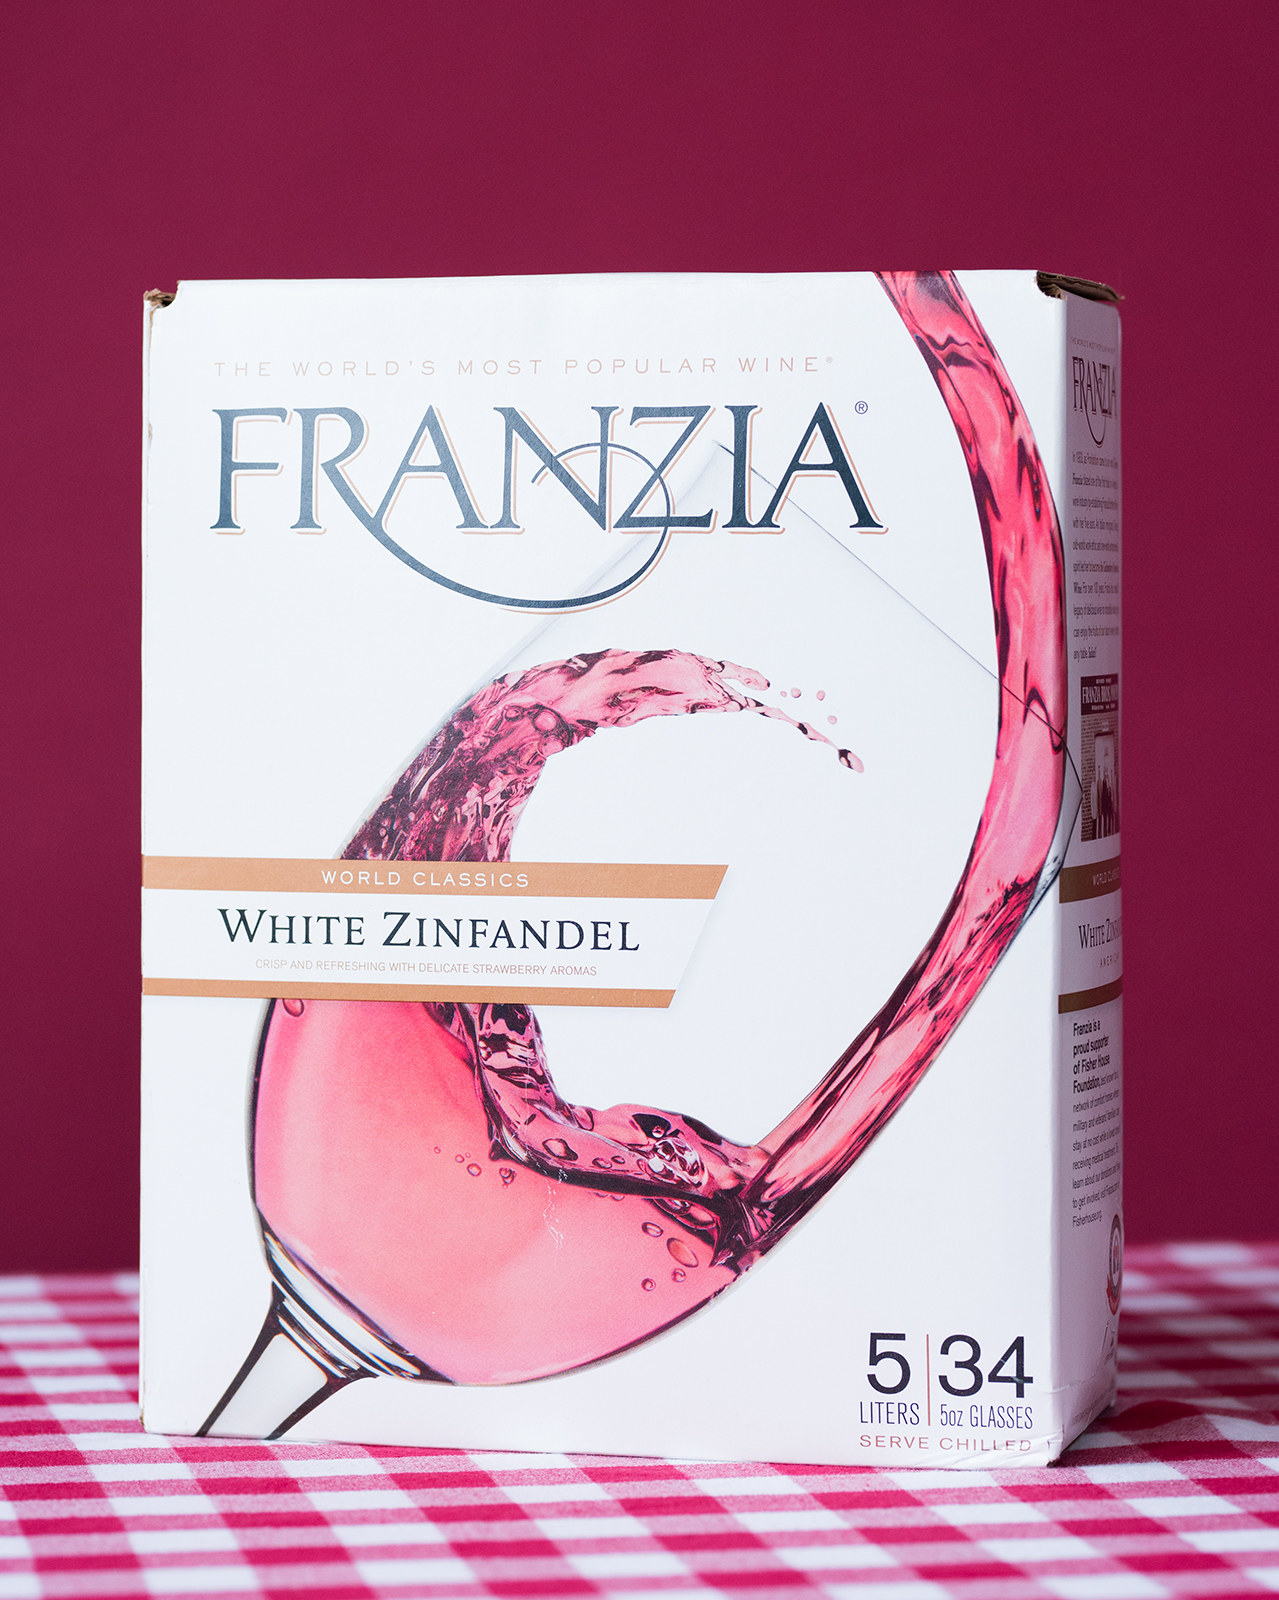 Cheap Boxed Wines Actually Taste 